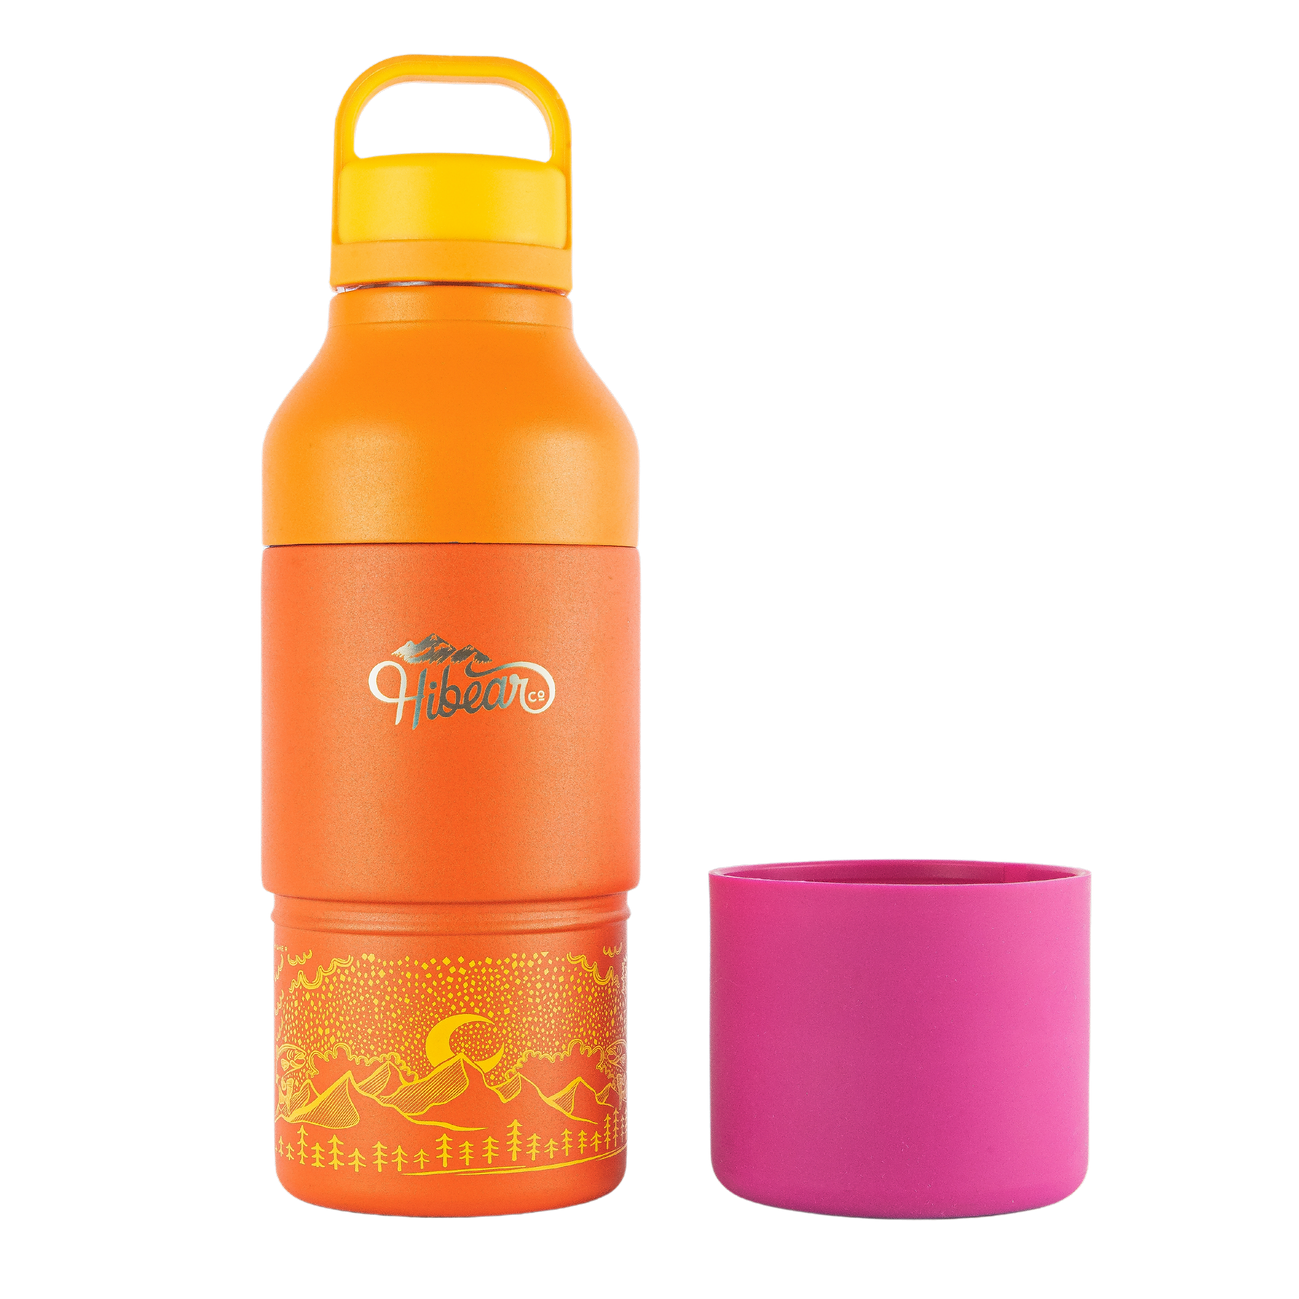 Five Of The Best Insulated Bottles For Adventure - BASE Magazine